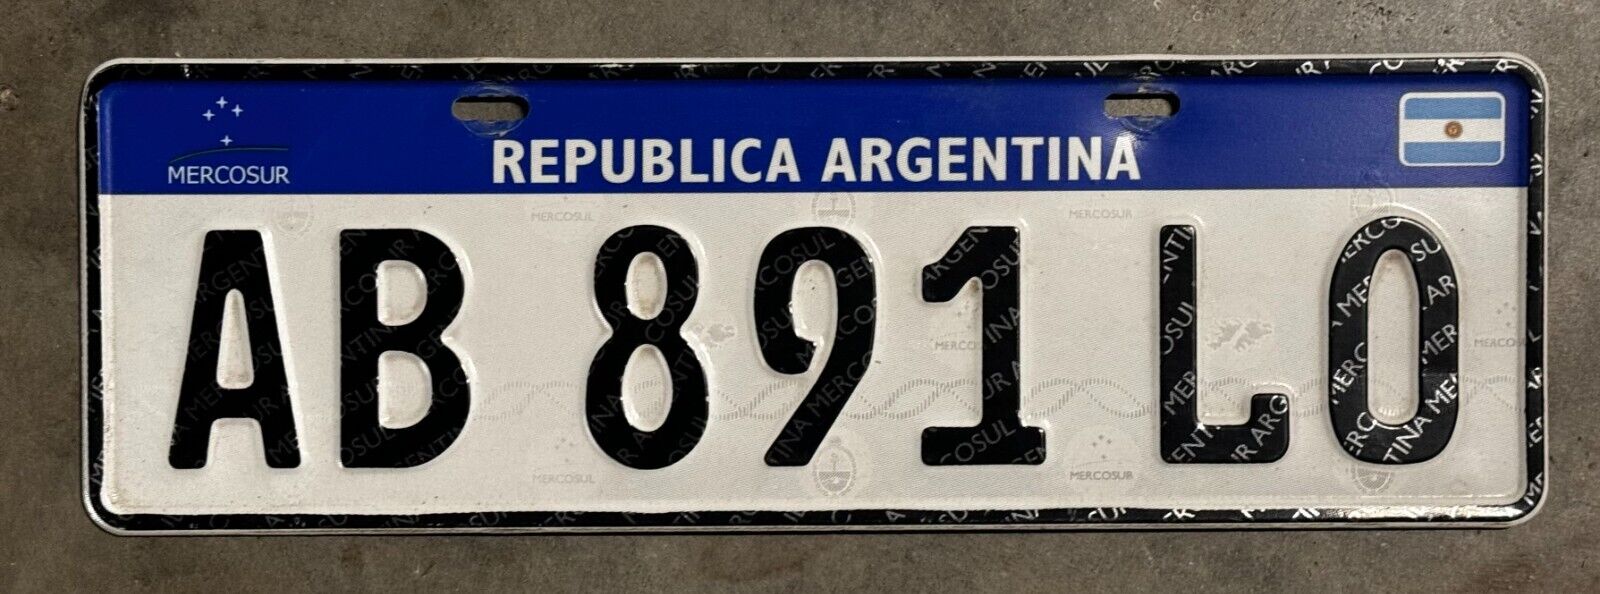 2018 Single Argentina CAR License Plate MERCOSUR - AB 819 LO - MINT HARD TO FIND